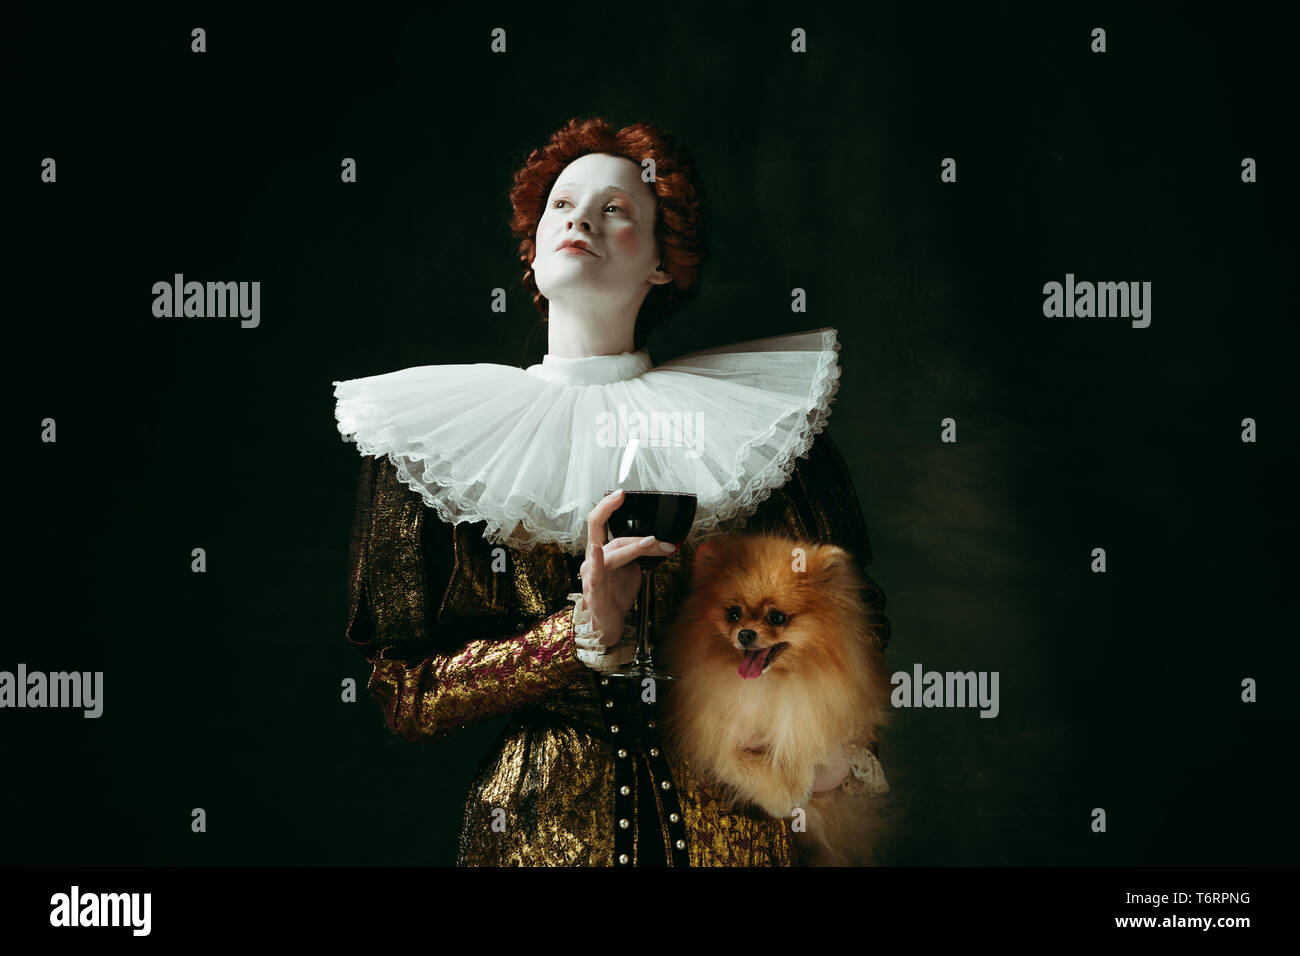 Feel right. Medieval redhead young woman in golden vintage clothing as a duchess holding puppy and glass with red wine on dark green background. Concept of comparison of eras, modernity, renaissance. Stock Photo